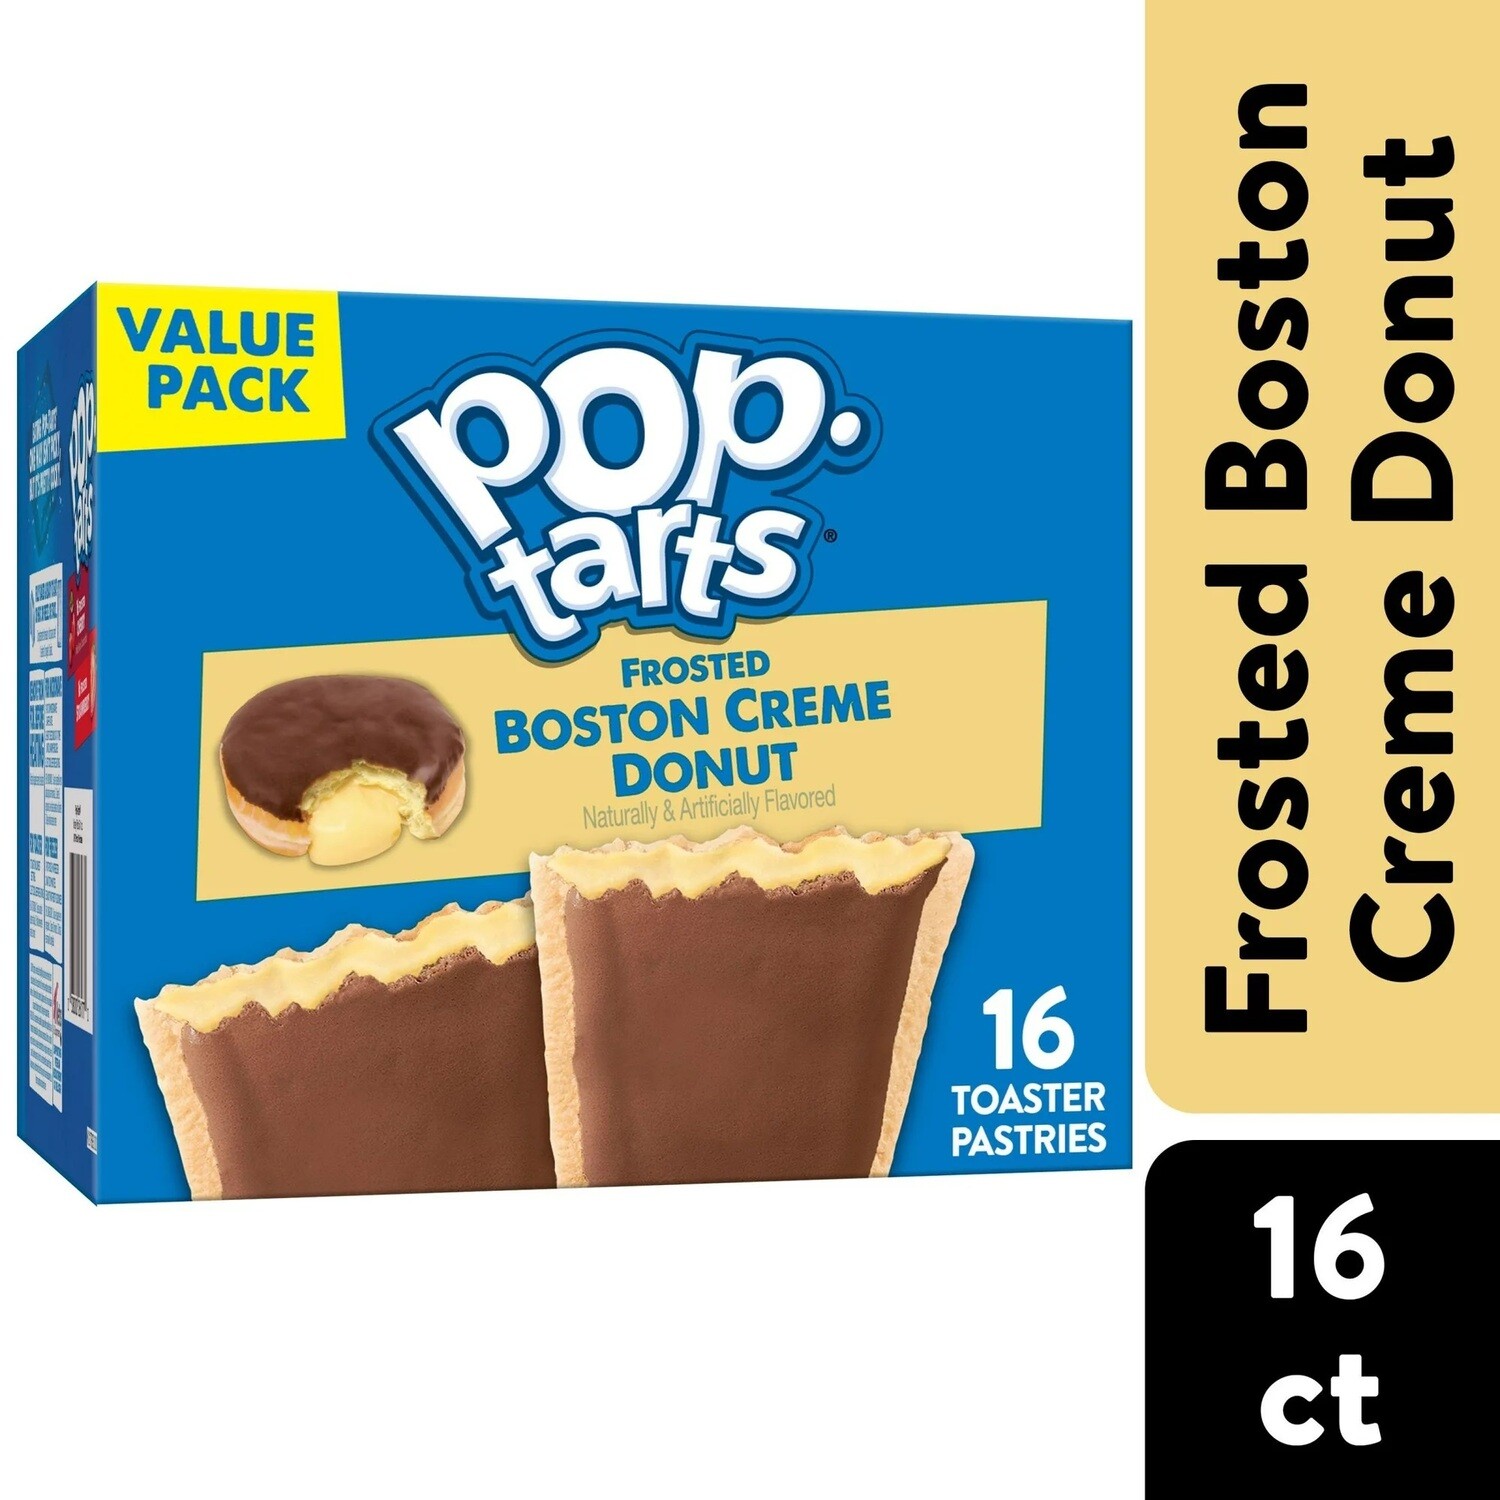 Pop Tarts 16ct Value Pack     Frosted Boston Creme Donut